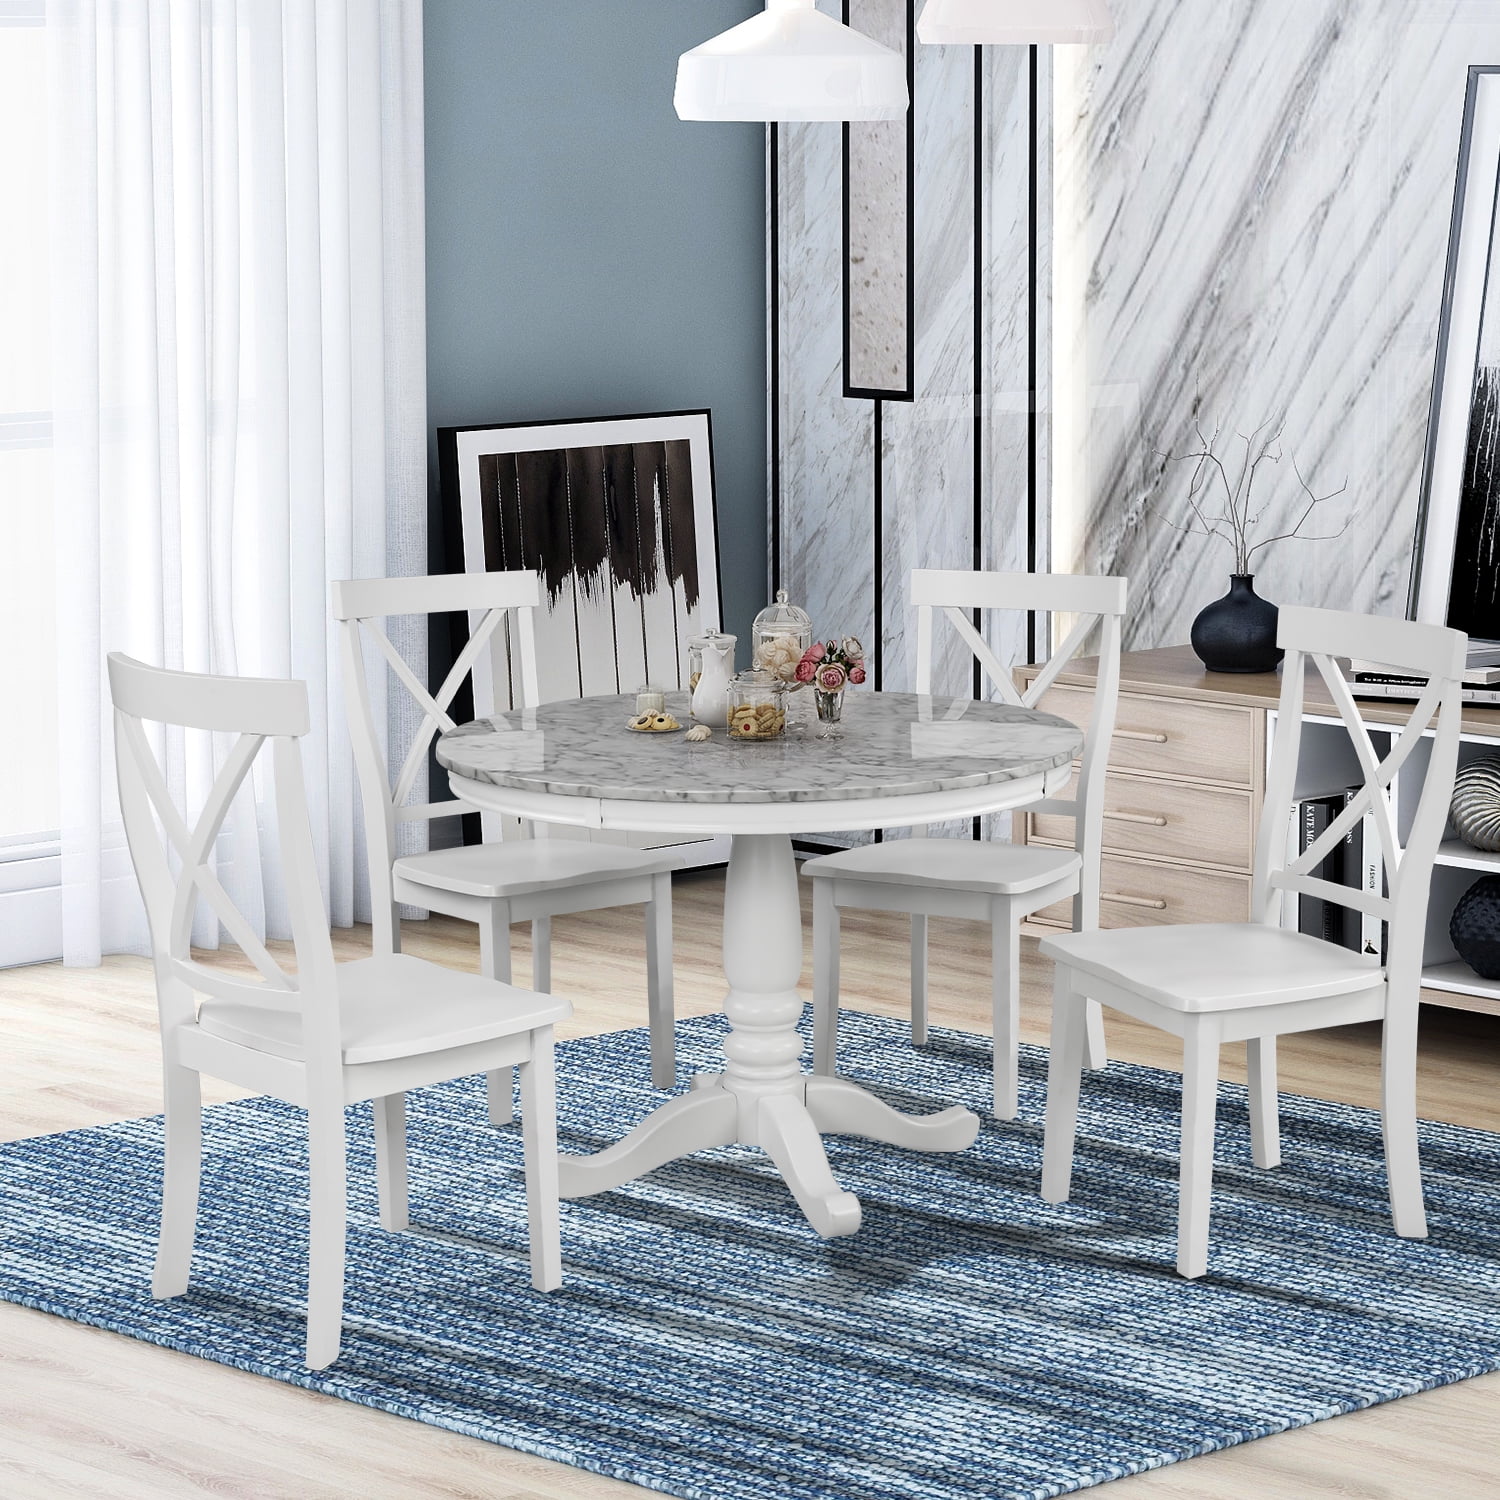 Solid Wood Dining Room Table, White Round Dining Table Set With Leaf